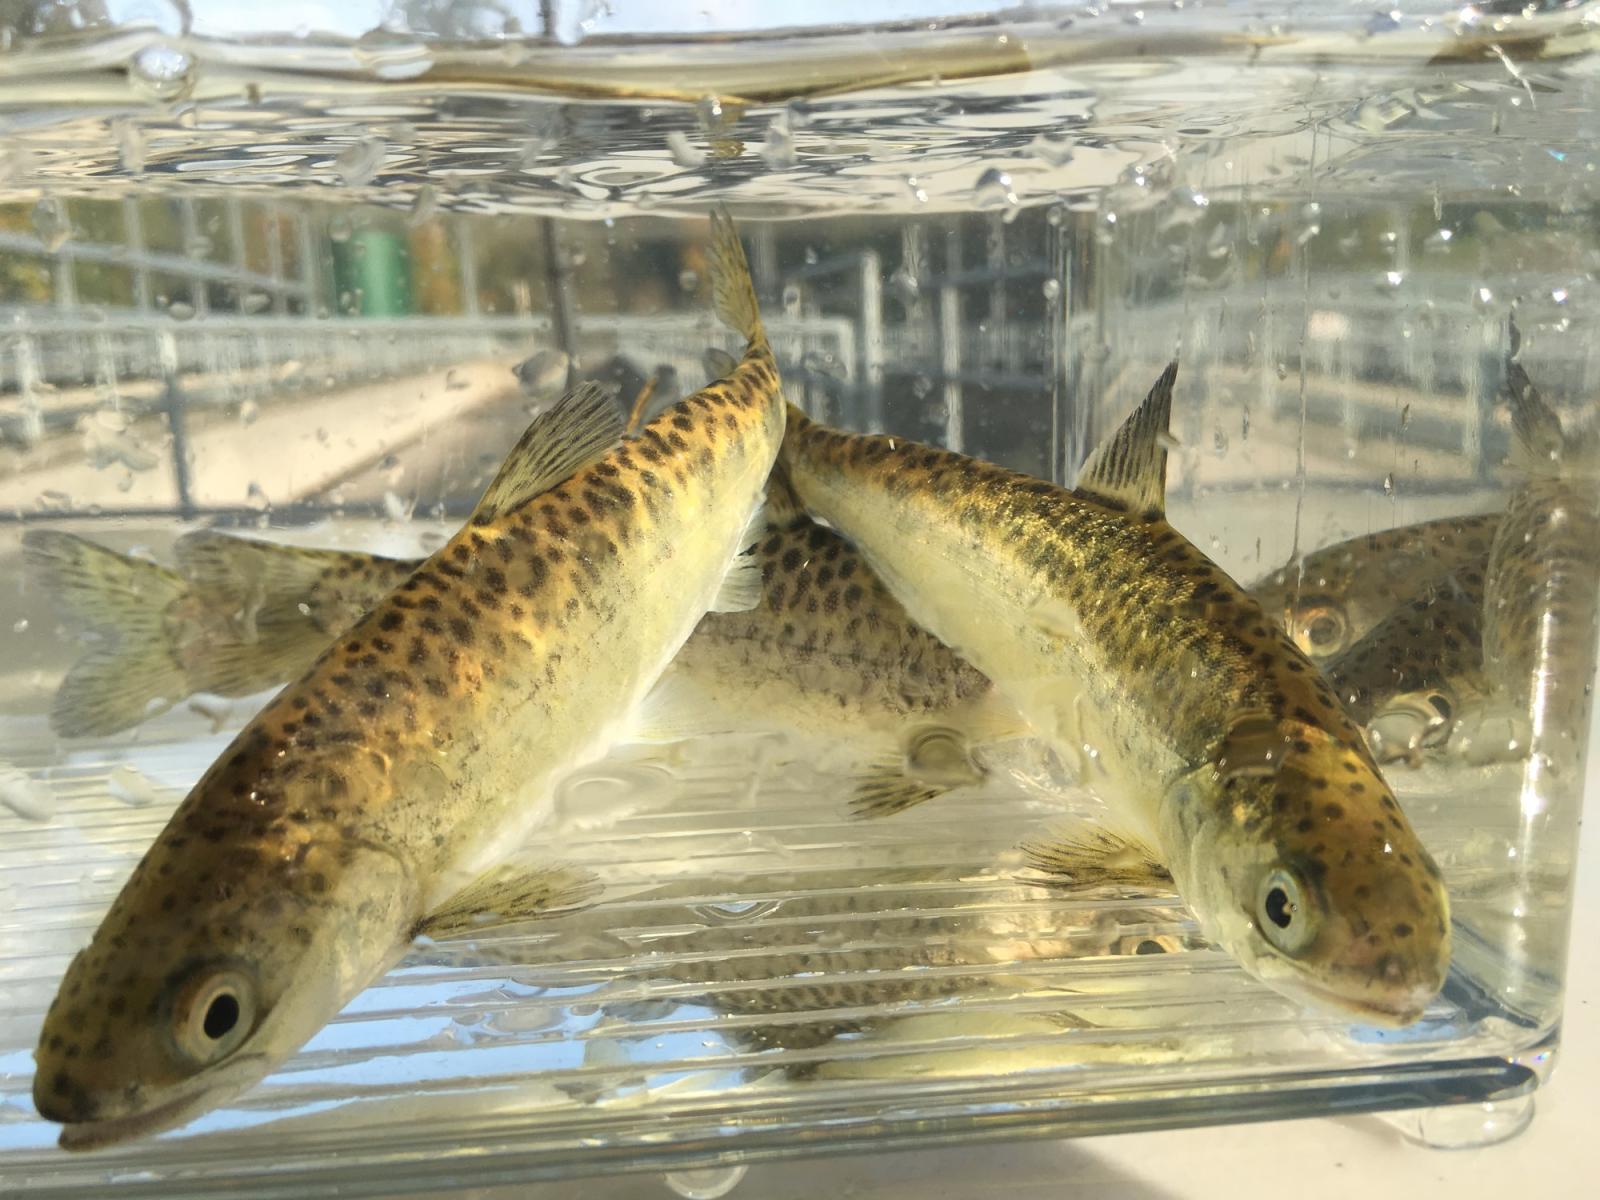 Spring Chinook salmon smolts from hatchery